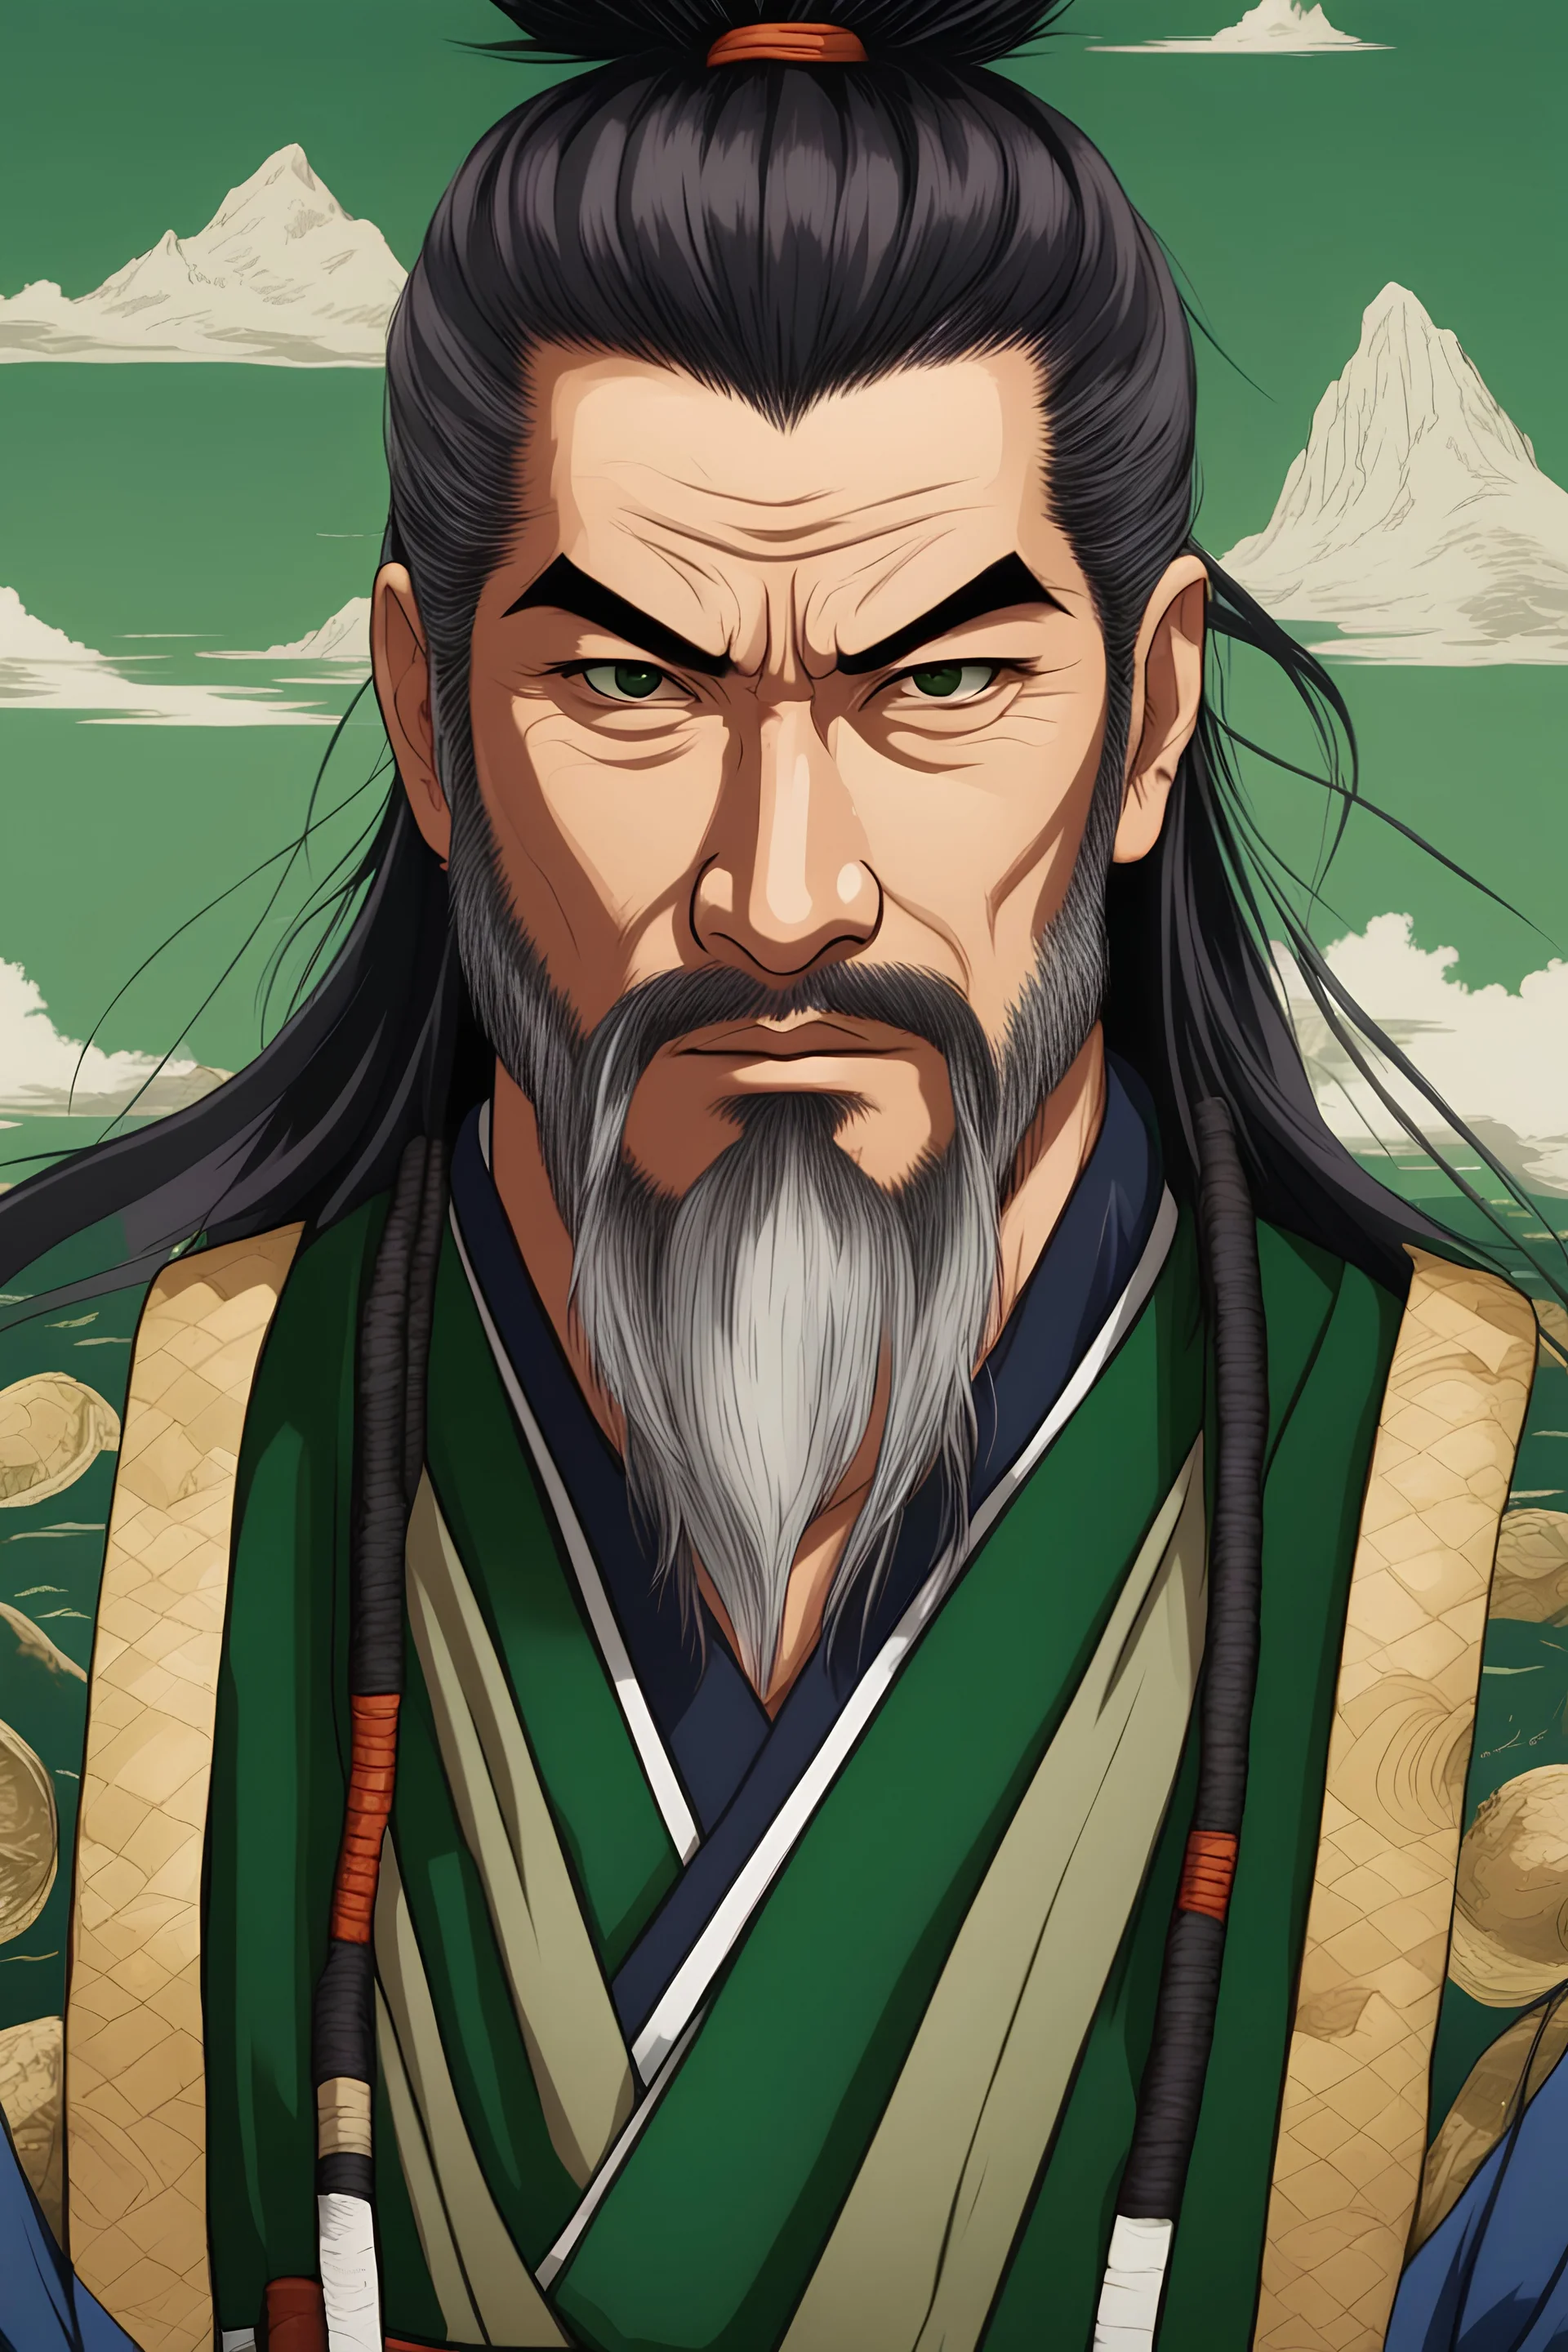 portrait of a middle age samurai, strong, heroic character, D&D character, bushido warrior, handsome, serious look, gentle smile, 8k resolution, long black hair, green yukata with tortoise signets, no left arm, trim beard,japanese harbor in the background,